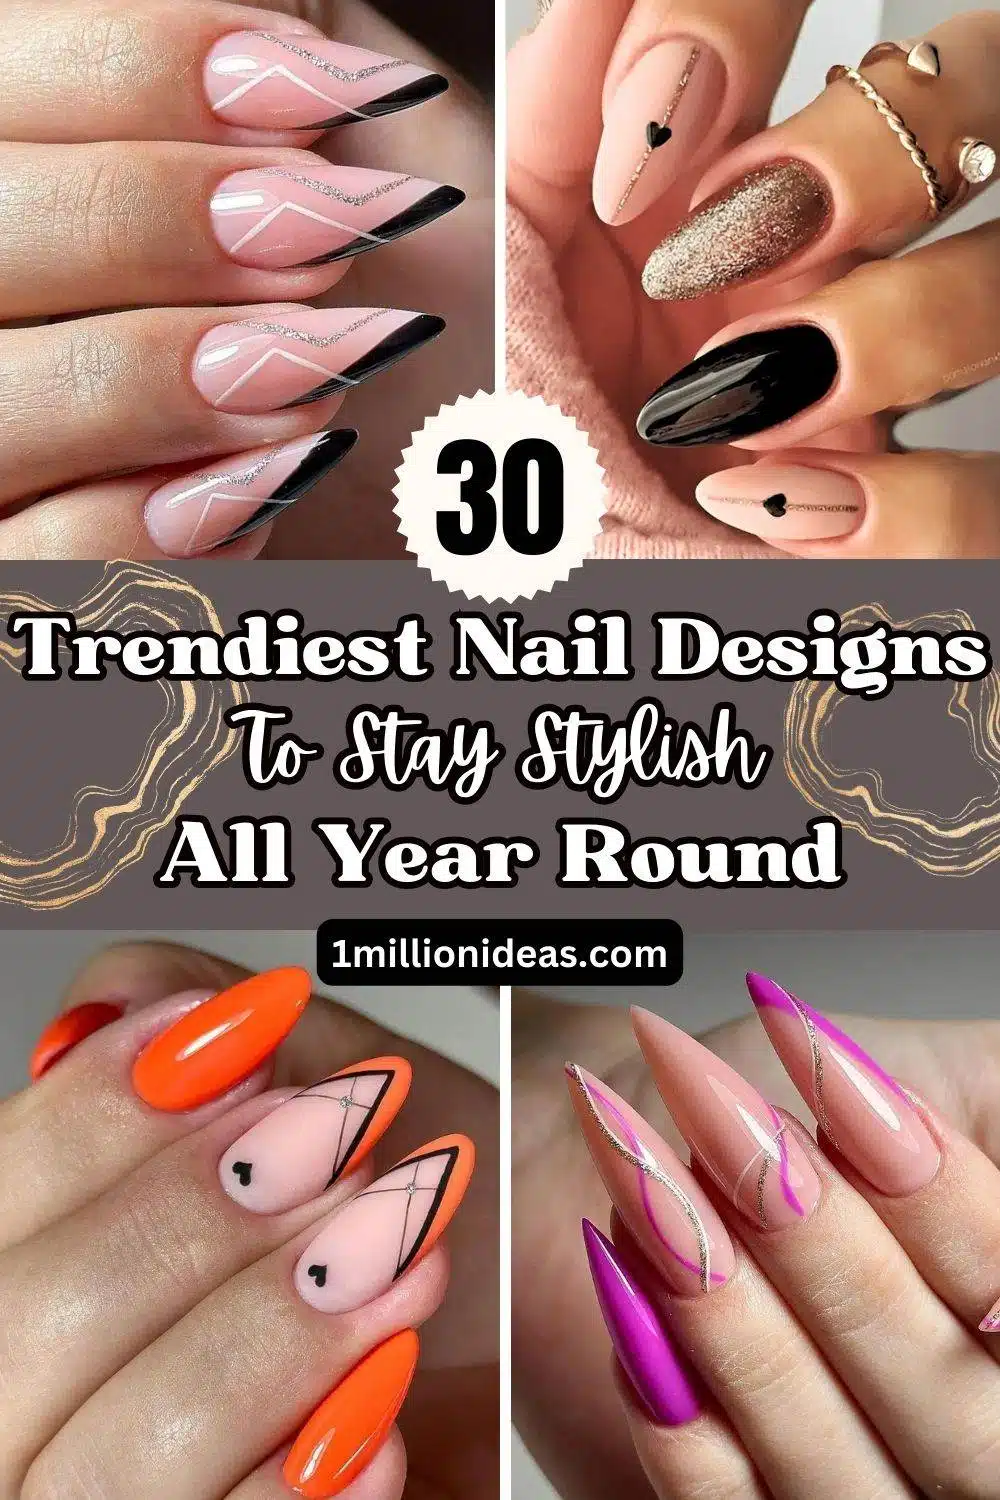 30 Trendiest Nail Designs To Stay Stylish All Year Round - 67